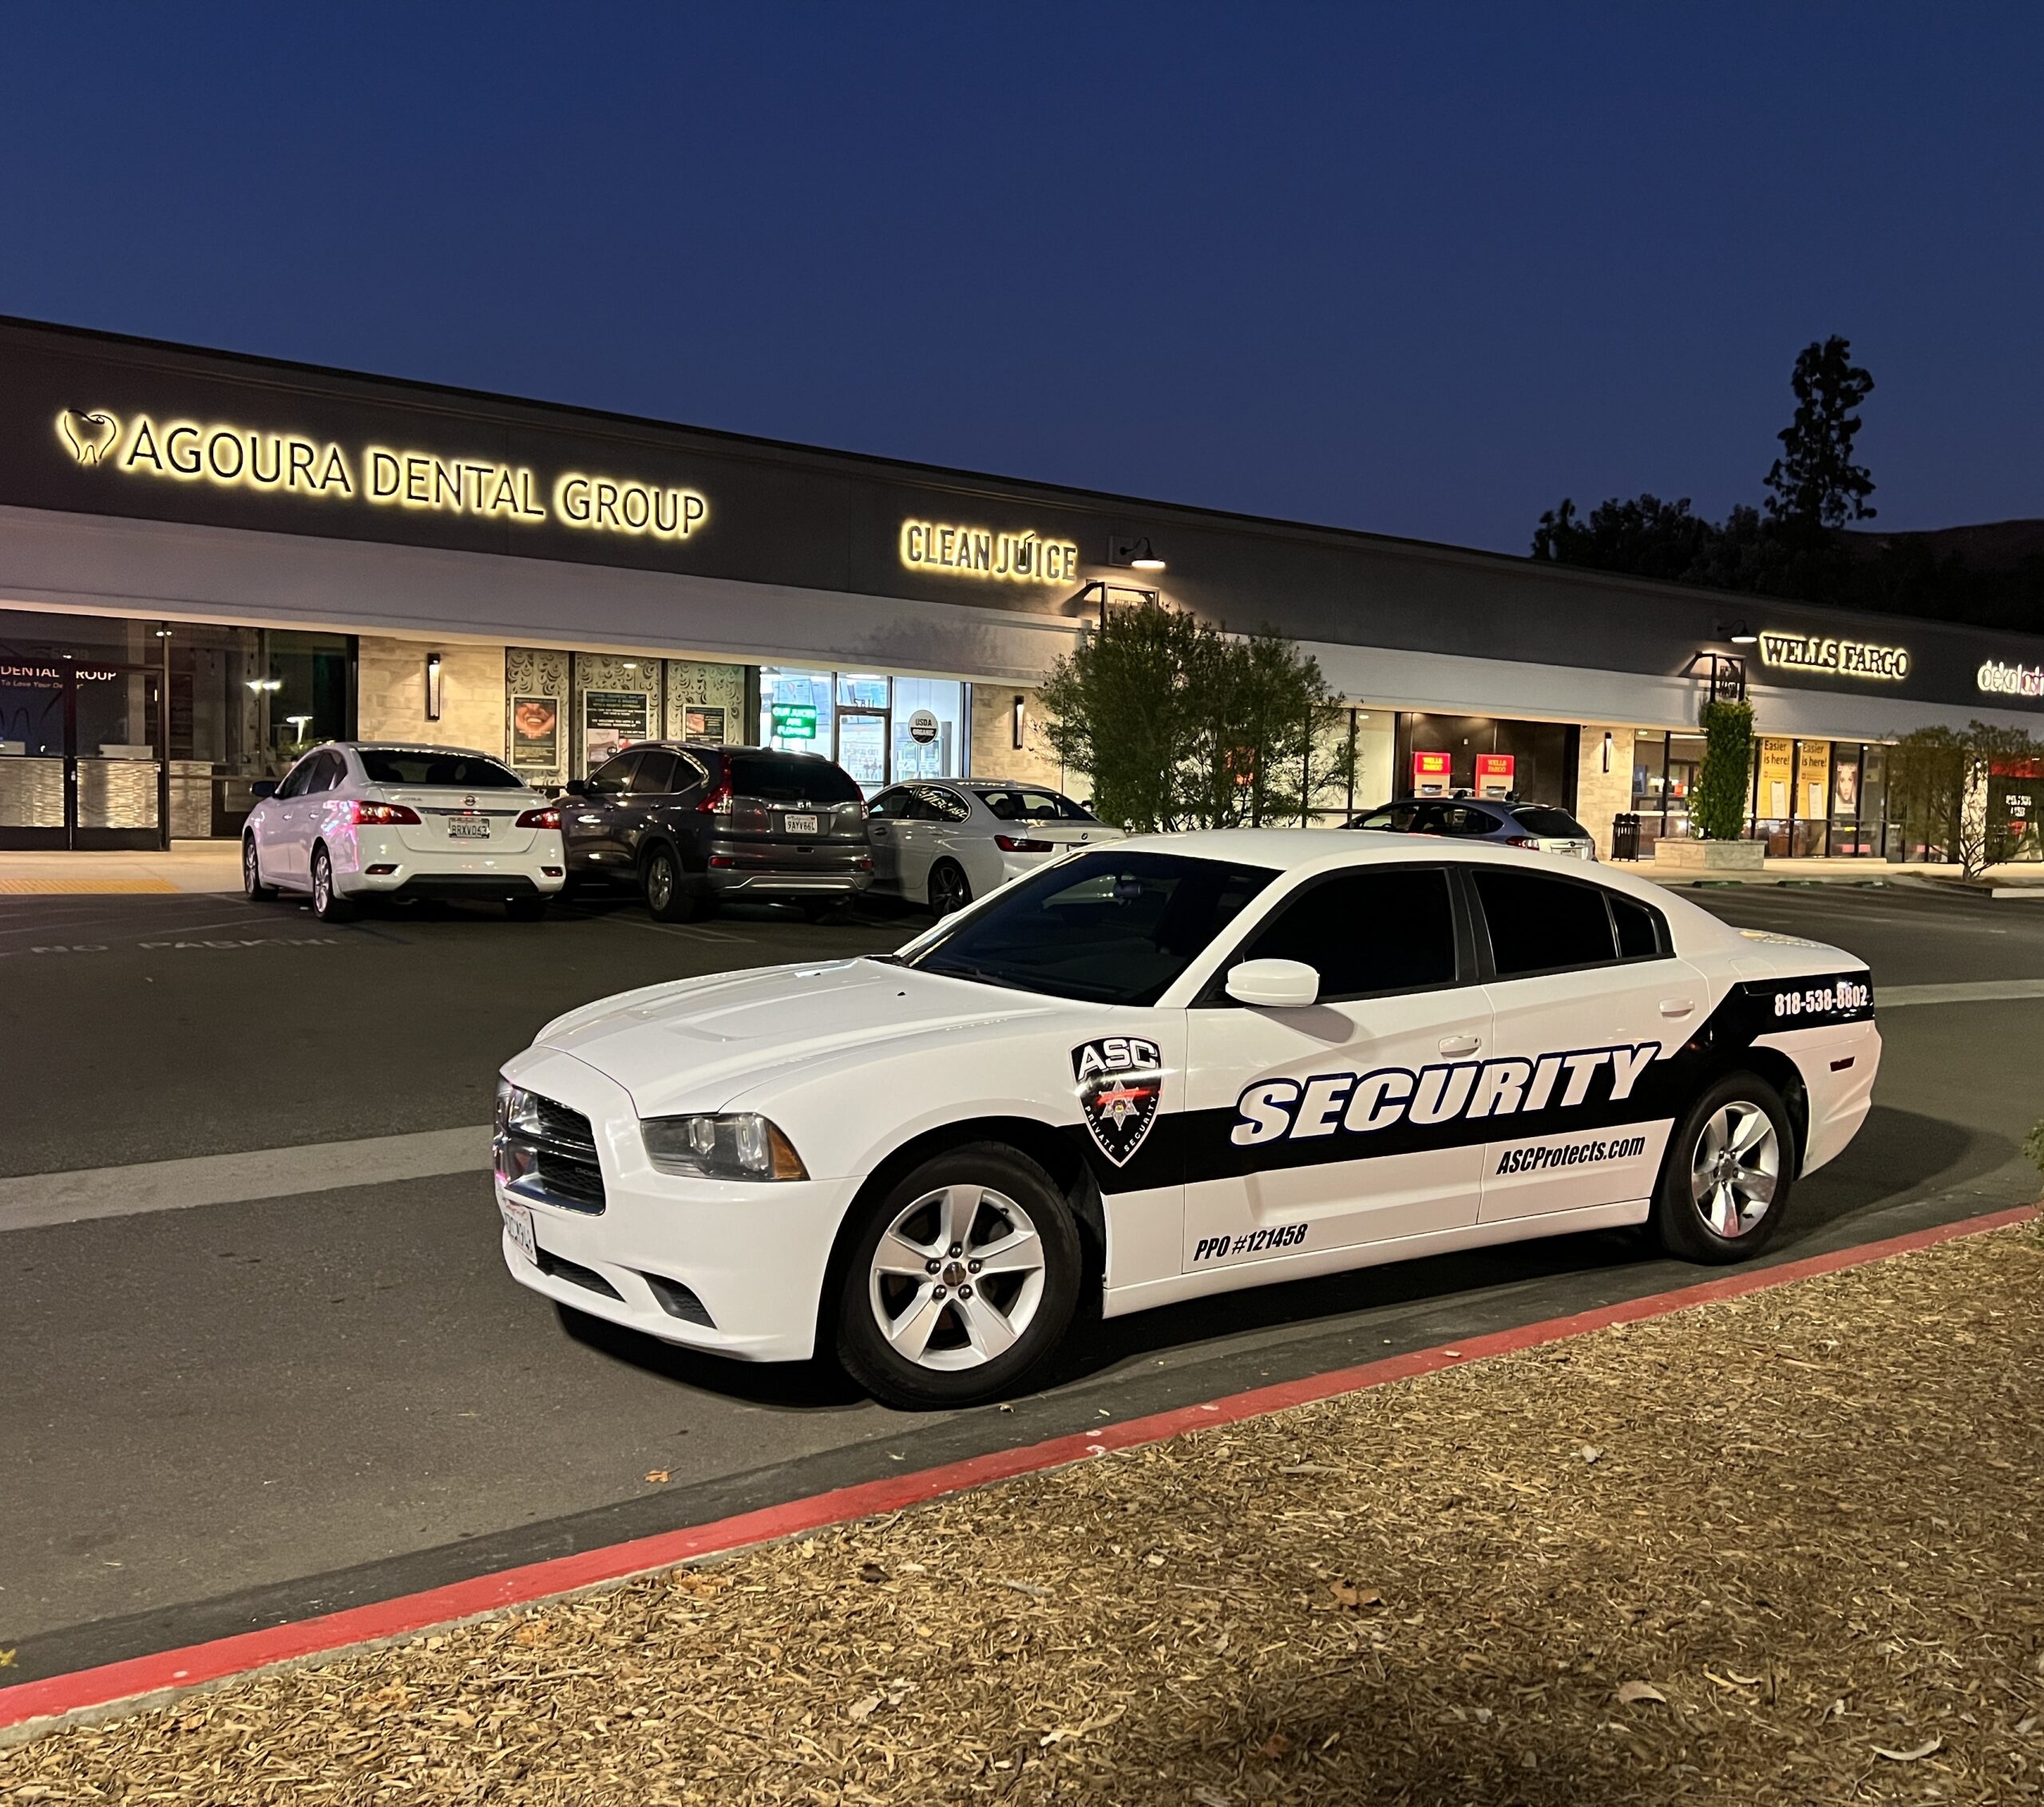 ASC Private Security's mobile patrol car in front of Agoura Dental Group